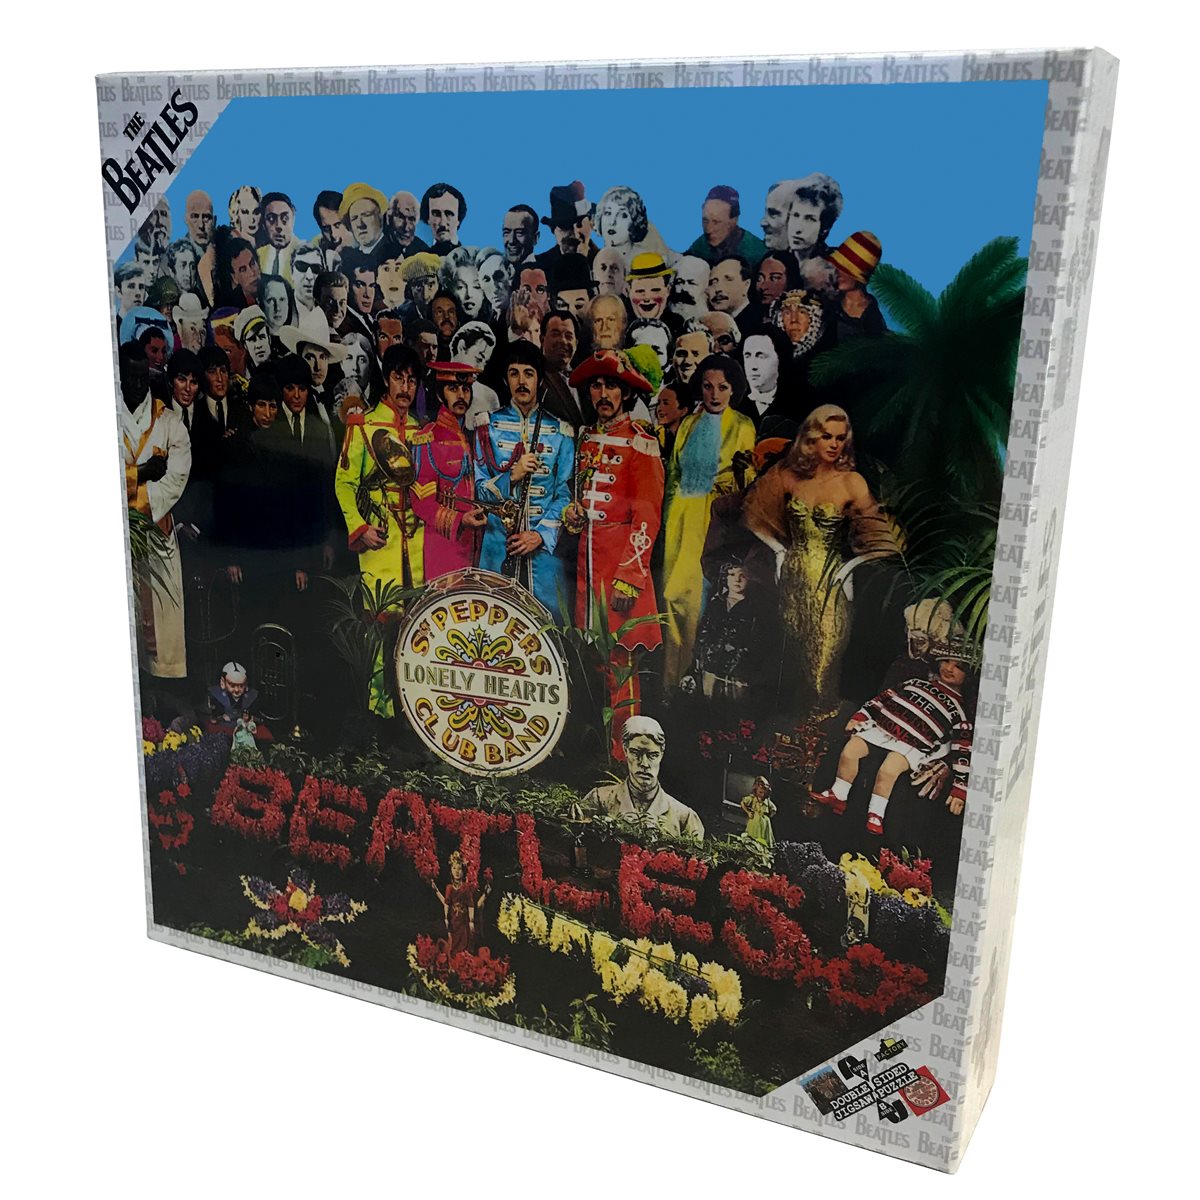 The Beatles-The Beatles-Let It Be Double Face Album art jigsaw puzzle NEUF 